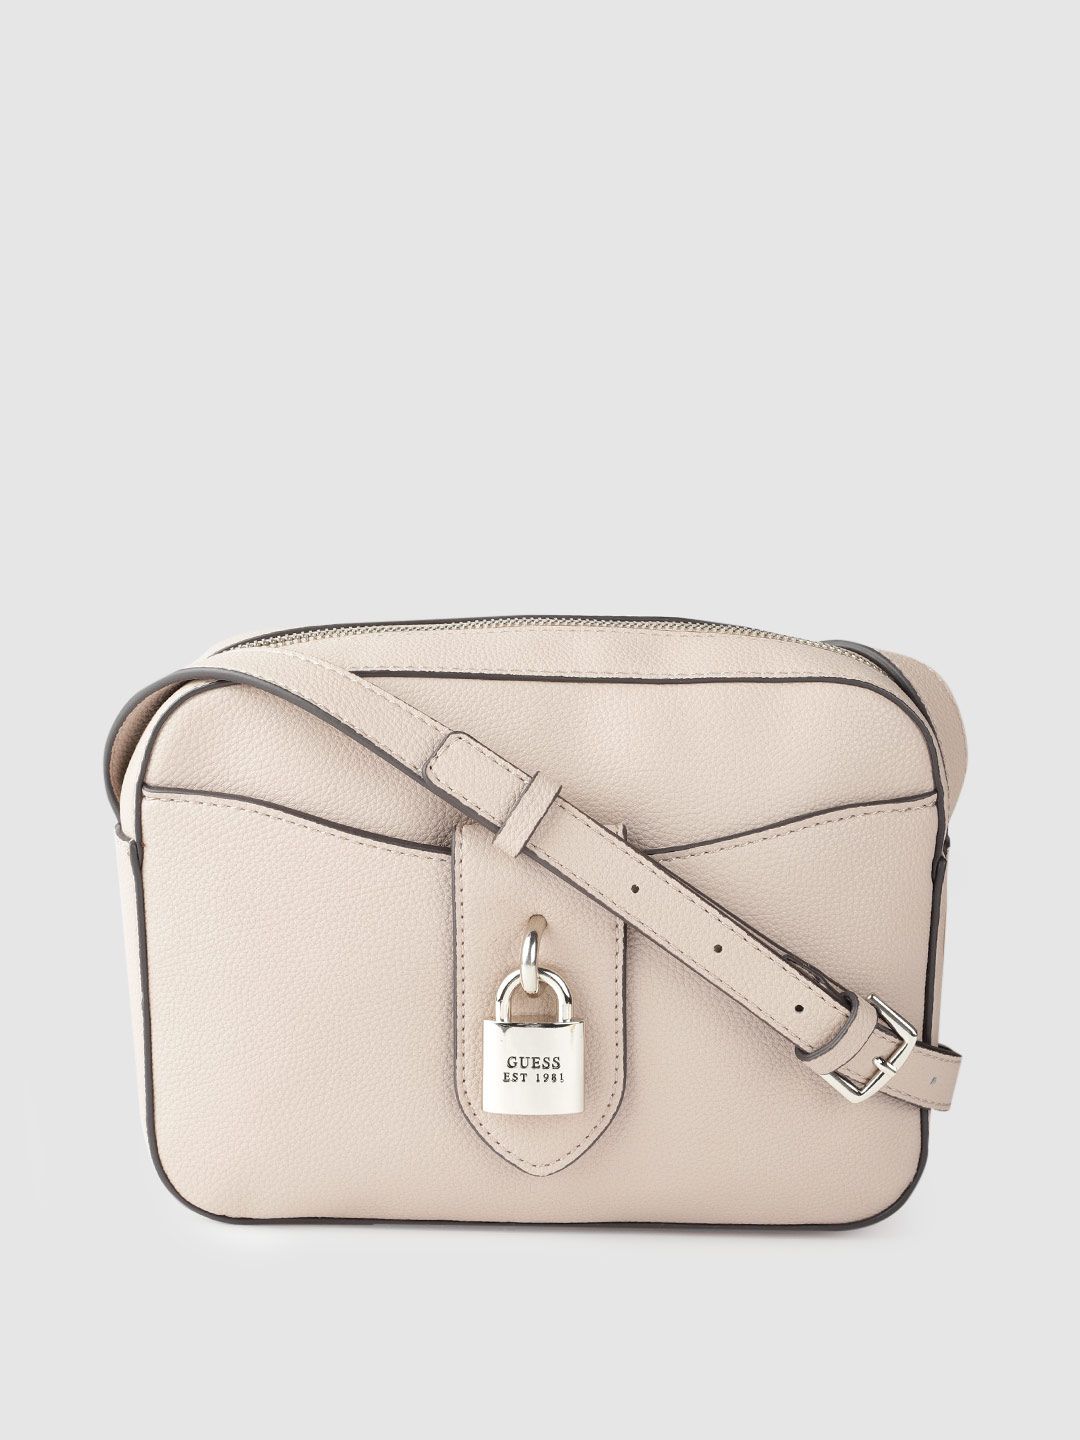 GUESS Women Dusty Pink Solid Structured Sling Bag Price in India